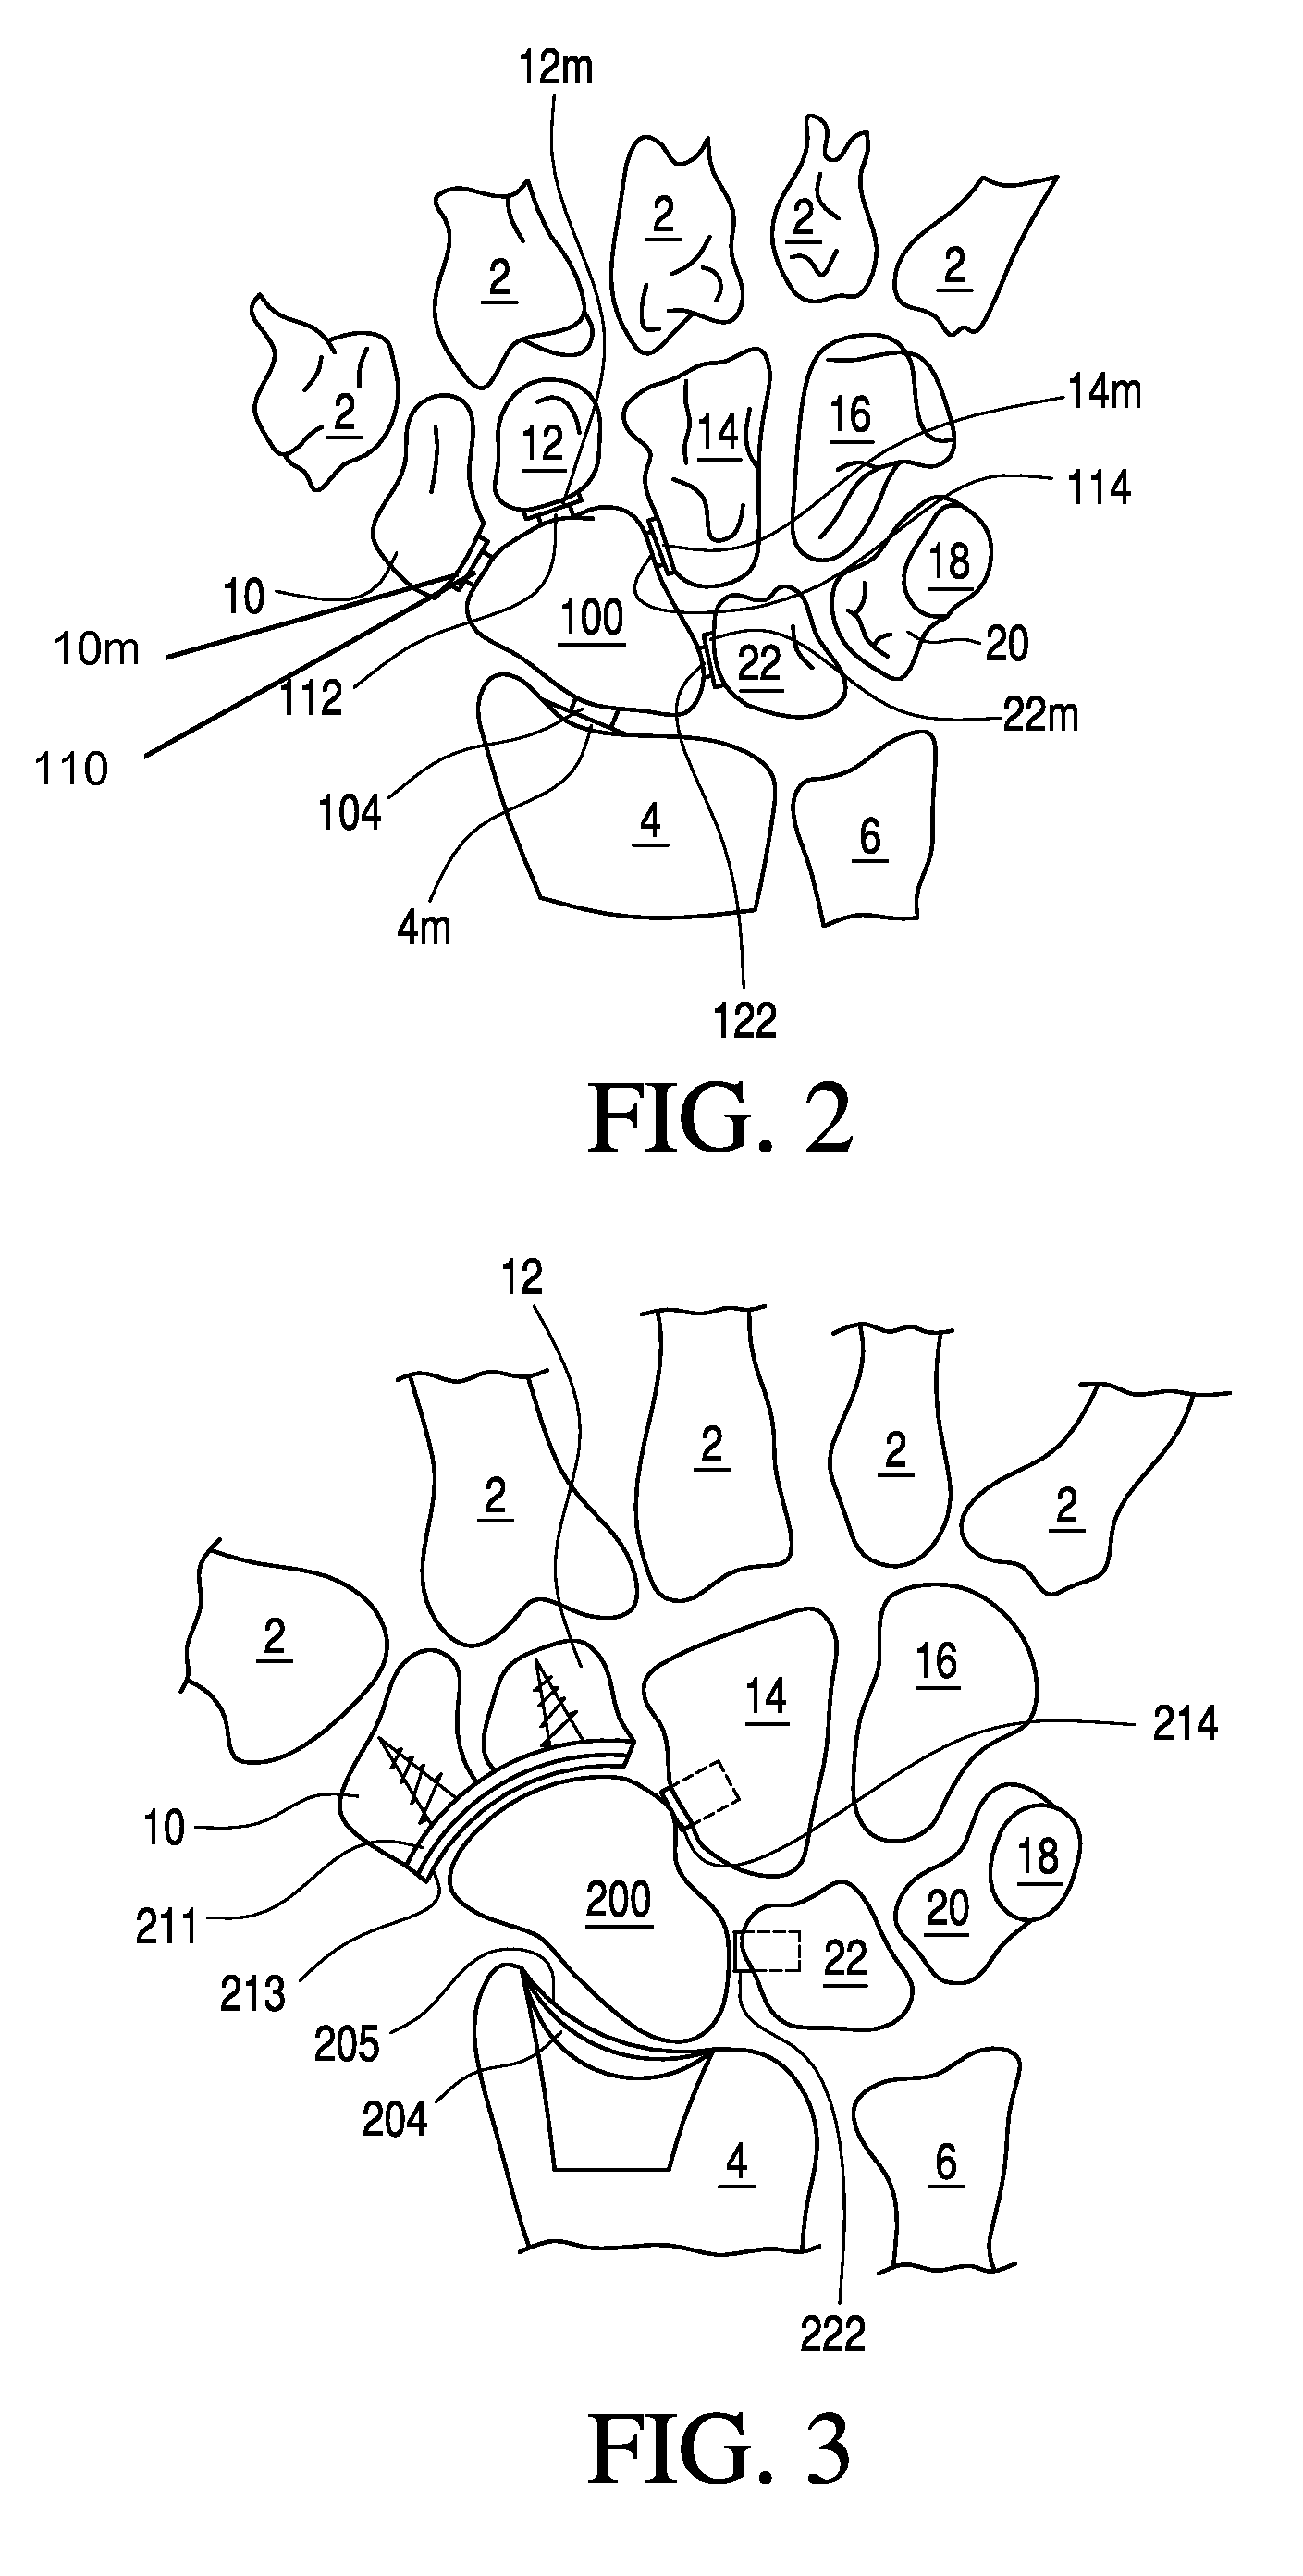 Bone prosthesis for maintaining joint operation in complex joints